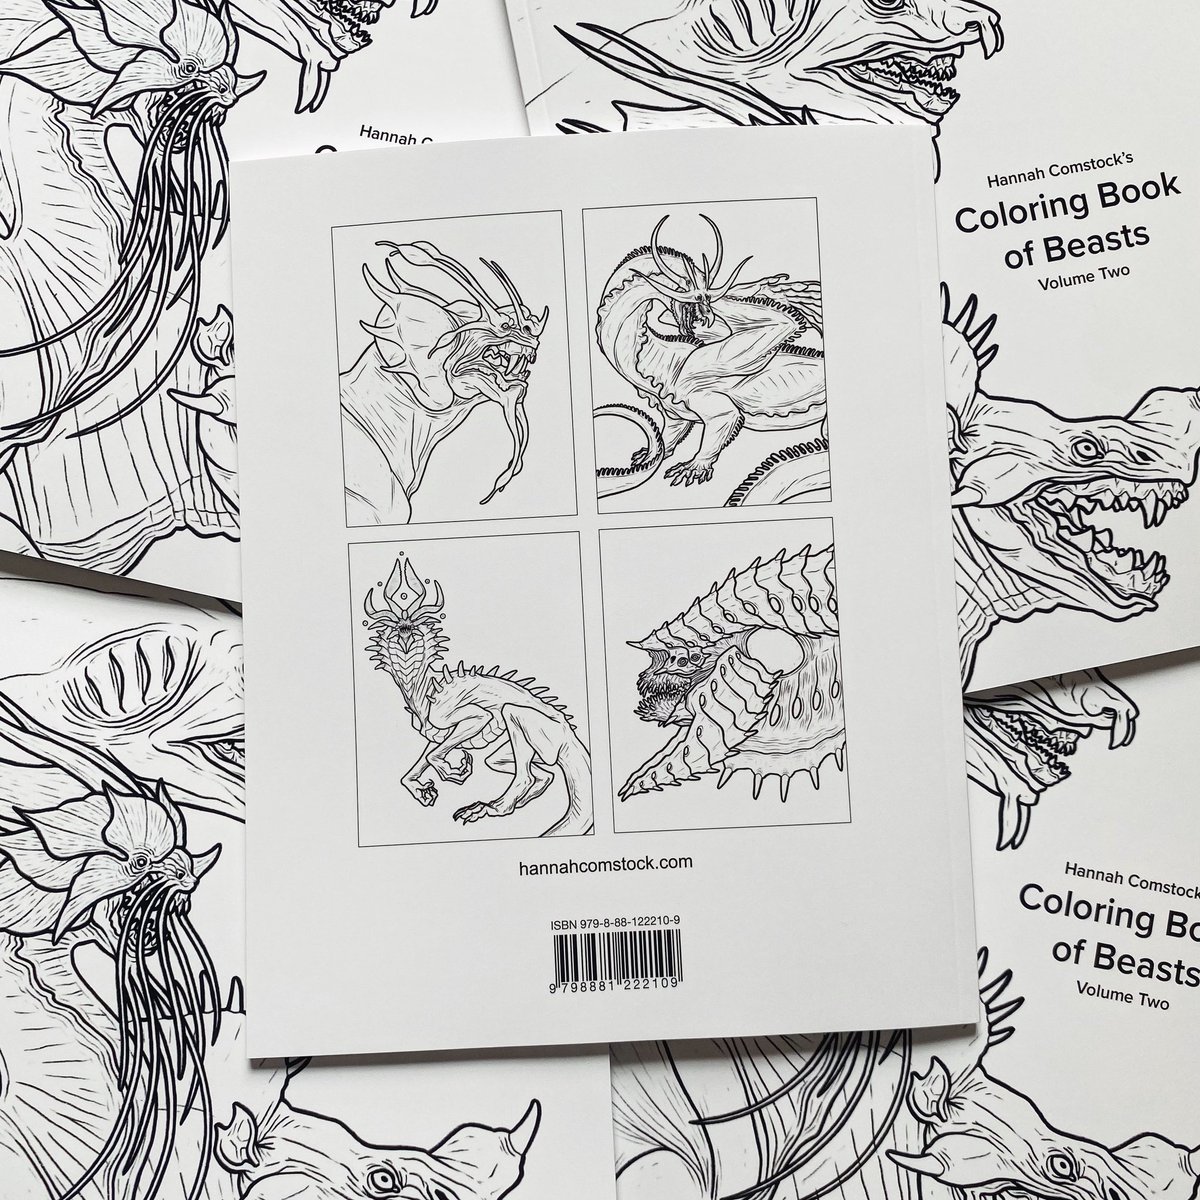 The Coloring Book of Beasts Volume 2 is here!